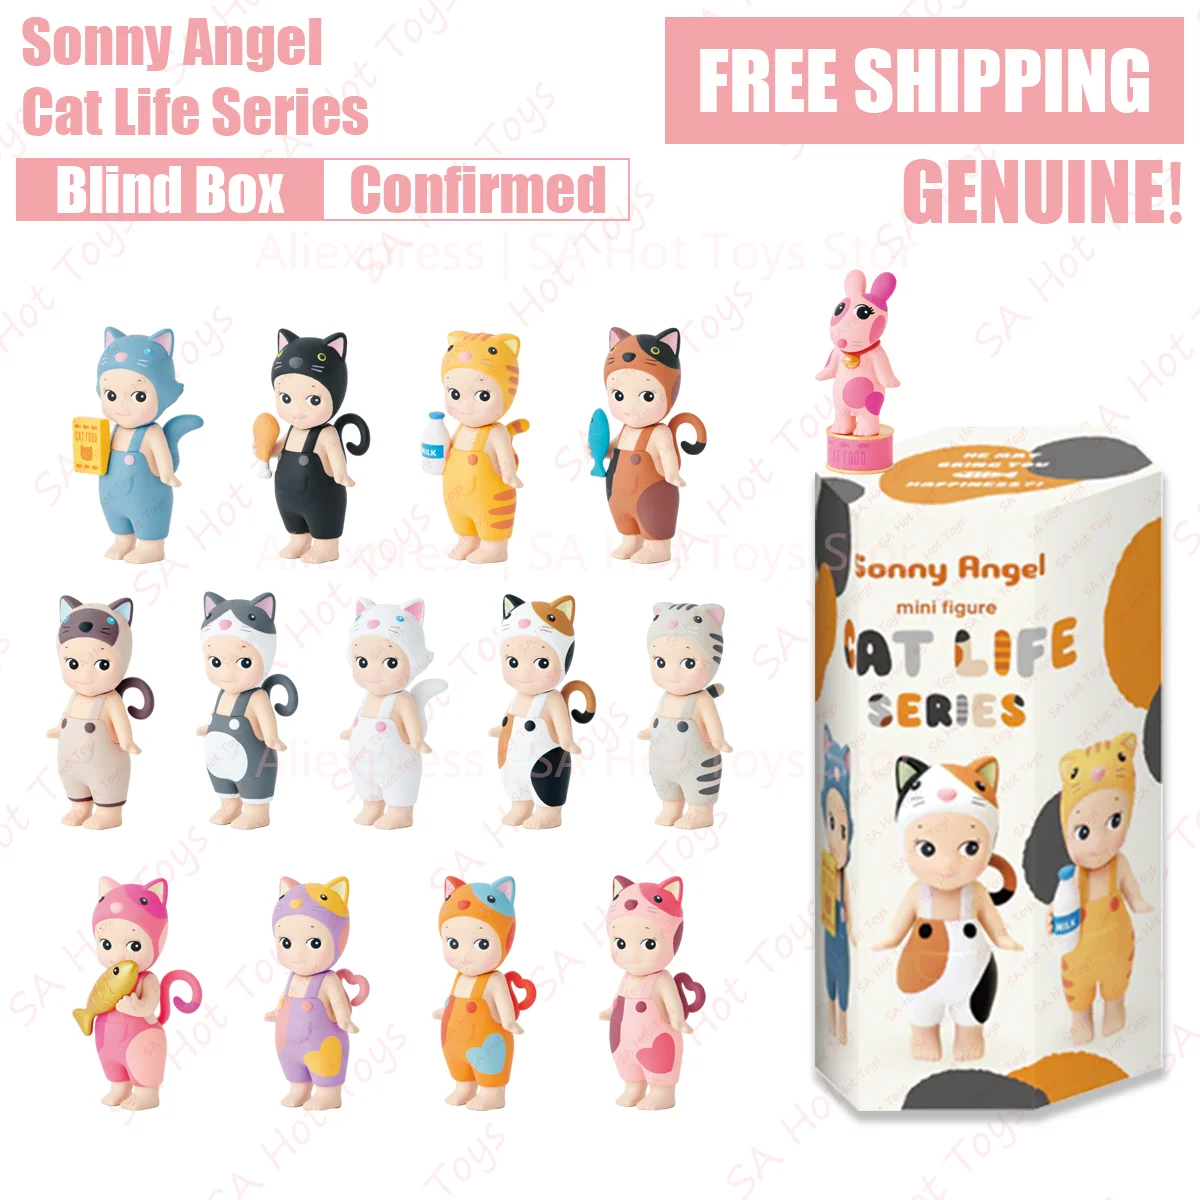 E blind box confirmed style genuine cute doll telephone screen decoration birthday gift thumb200